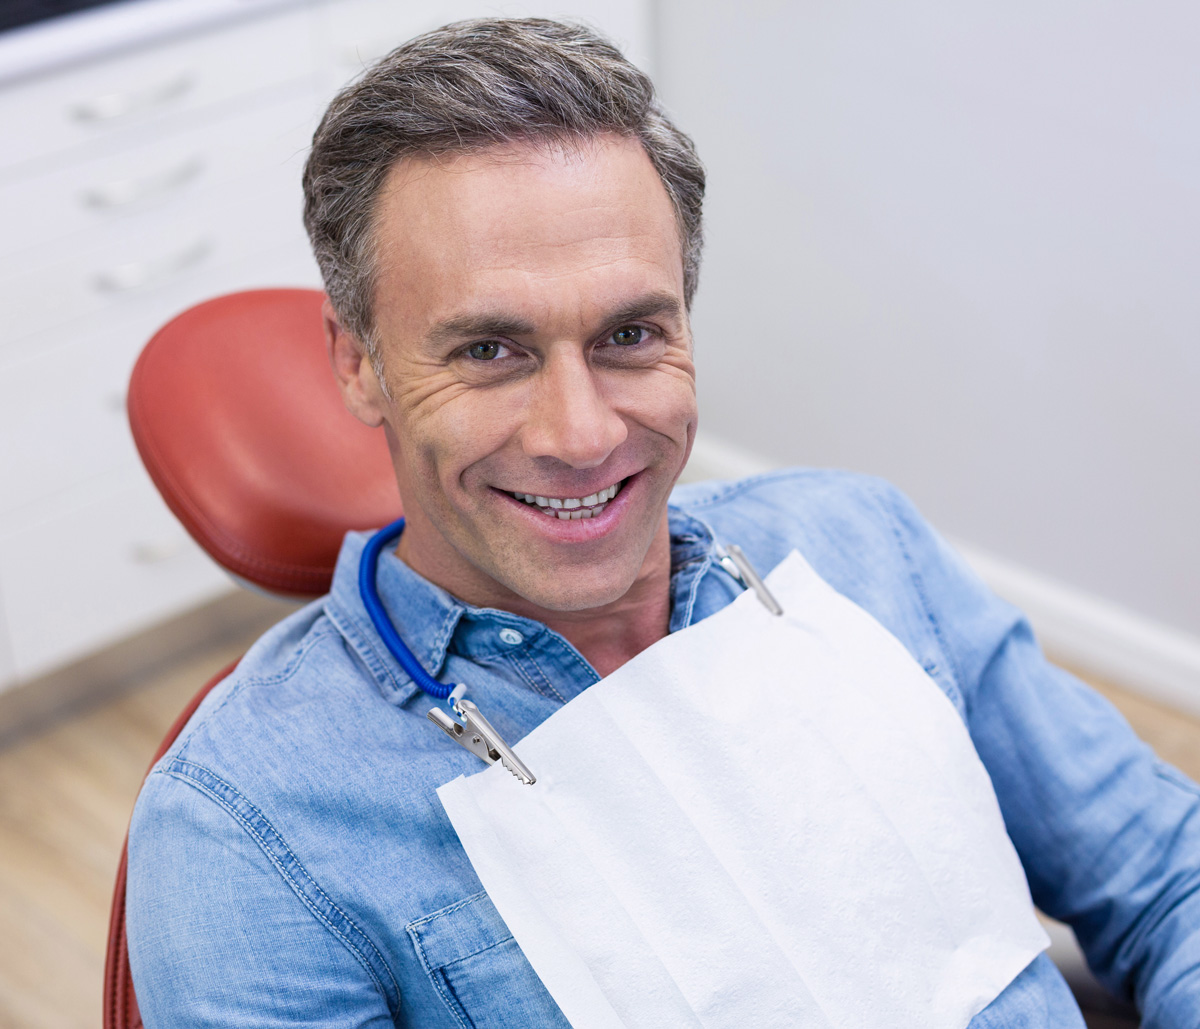 Tooth Extraction Recovery Time Near Me in San Francisco Area